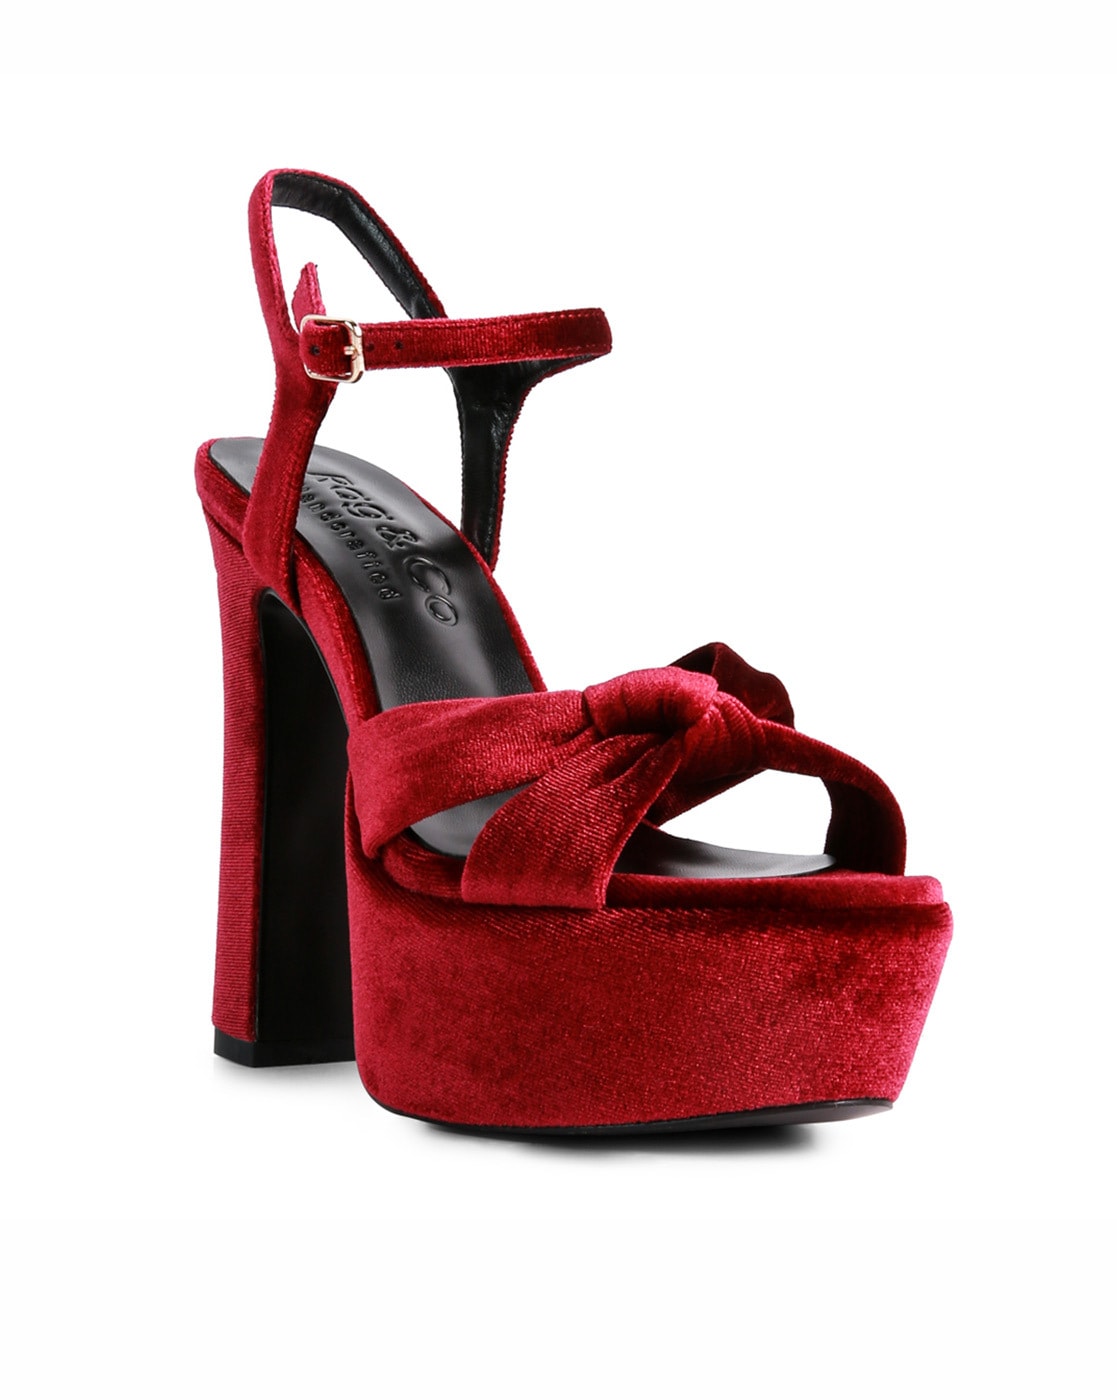 Designer Nude Red High Heel Strappy Sandals Heels With Button Ankle Wrap  For Women Perfect For Summer Parties And Open Toe Dress Shoes From  Yzhenzhen, $76.77 | DHgate.Com